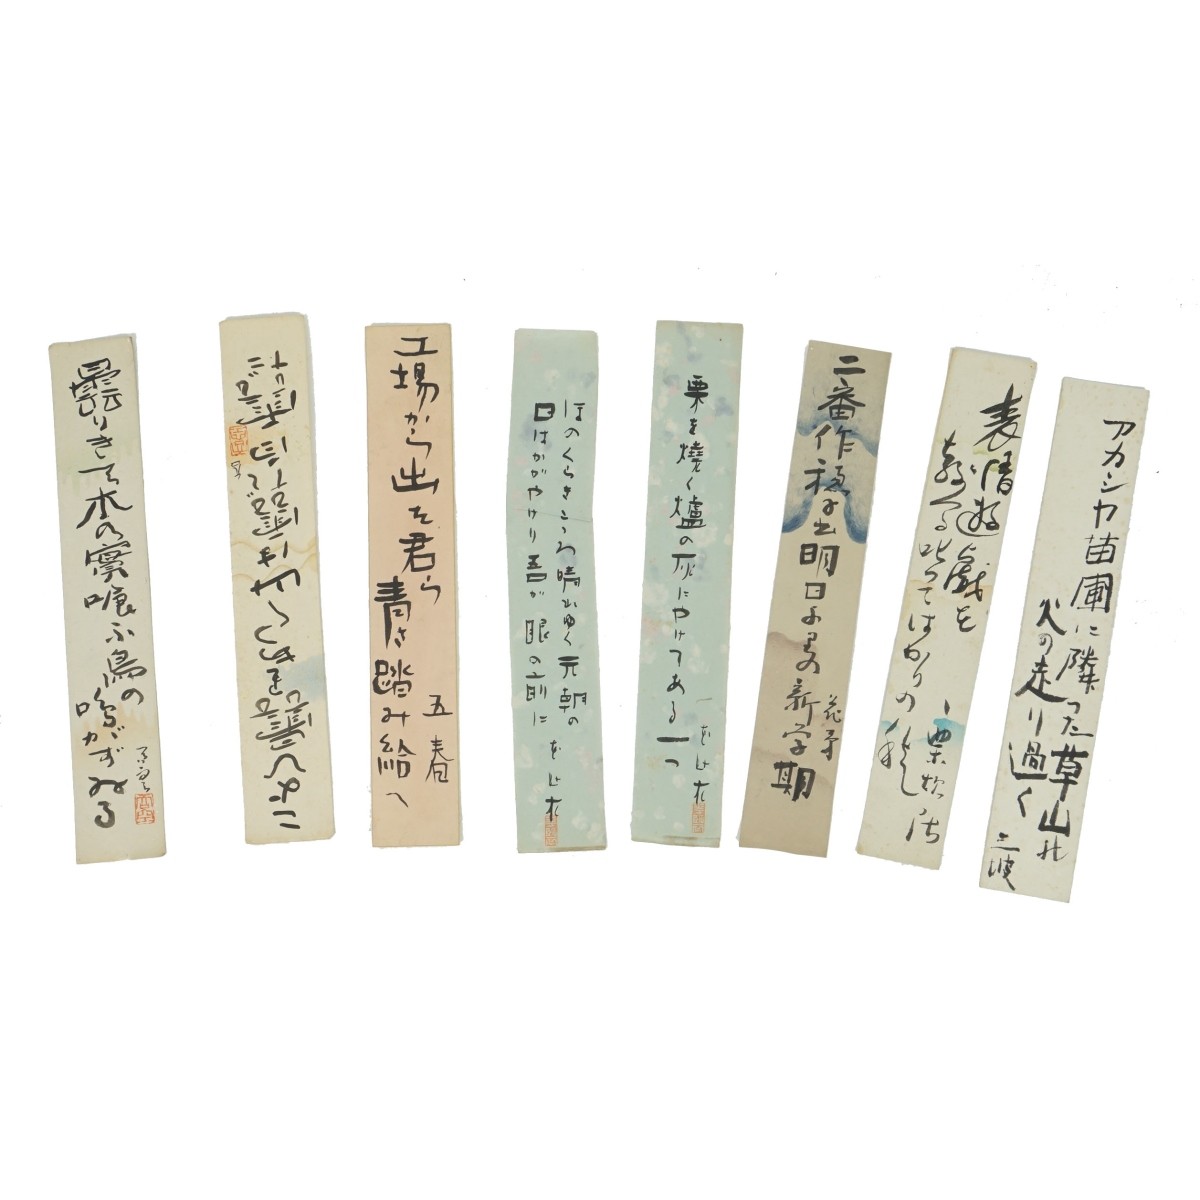 Chinese Calligraphy Strips